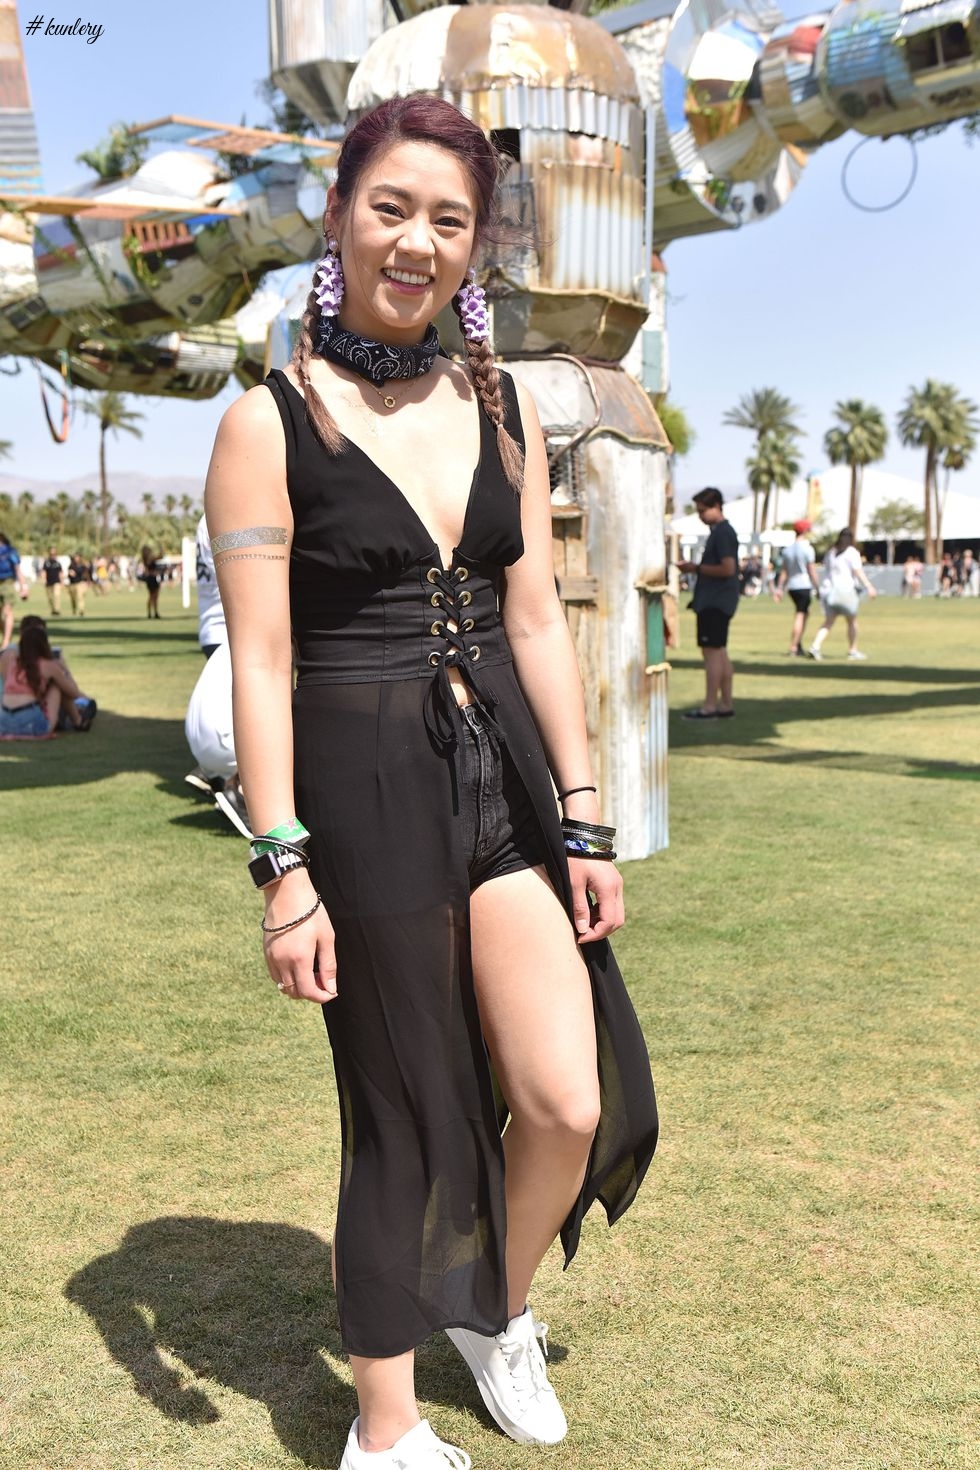 Check Out The Street Style Looks From Weekend 1 Of Coachella 2018